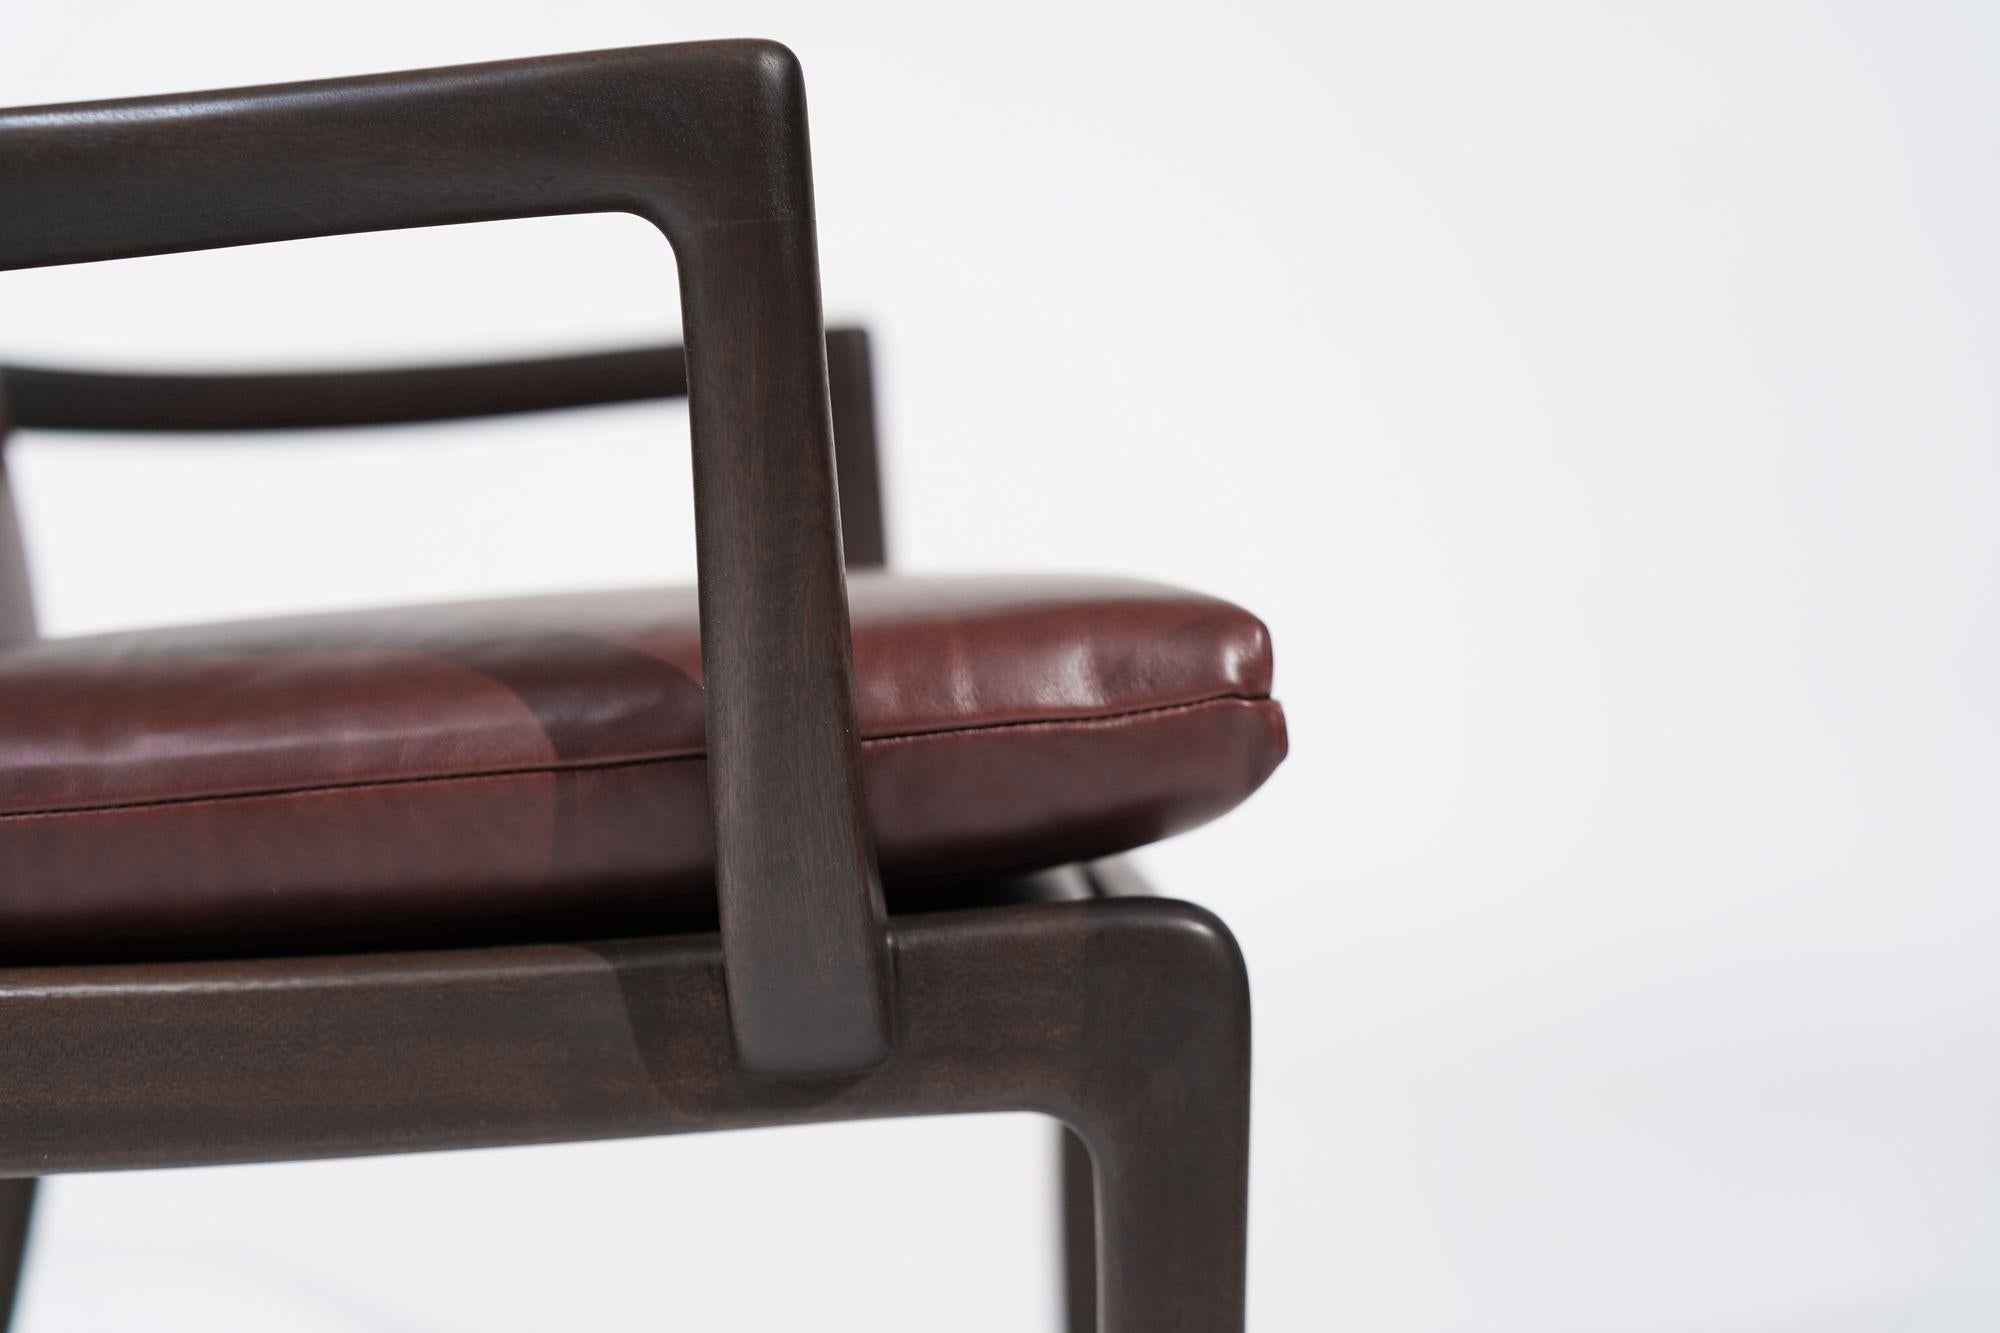 Set of Lounge Chairs by Ole Wanscher in Sangria Leather, Denmark, C. 1960s For Sale 6